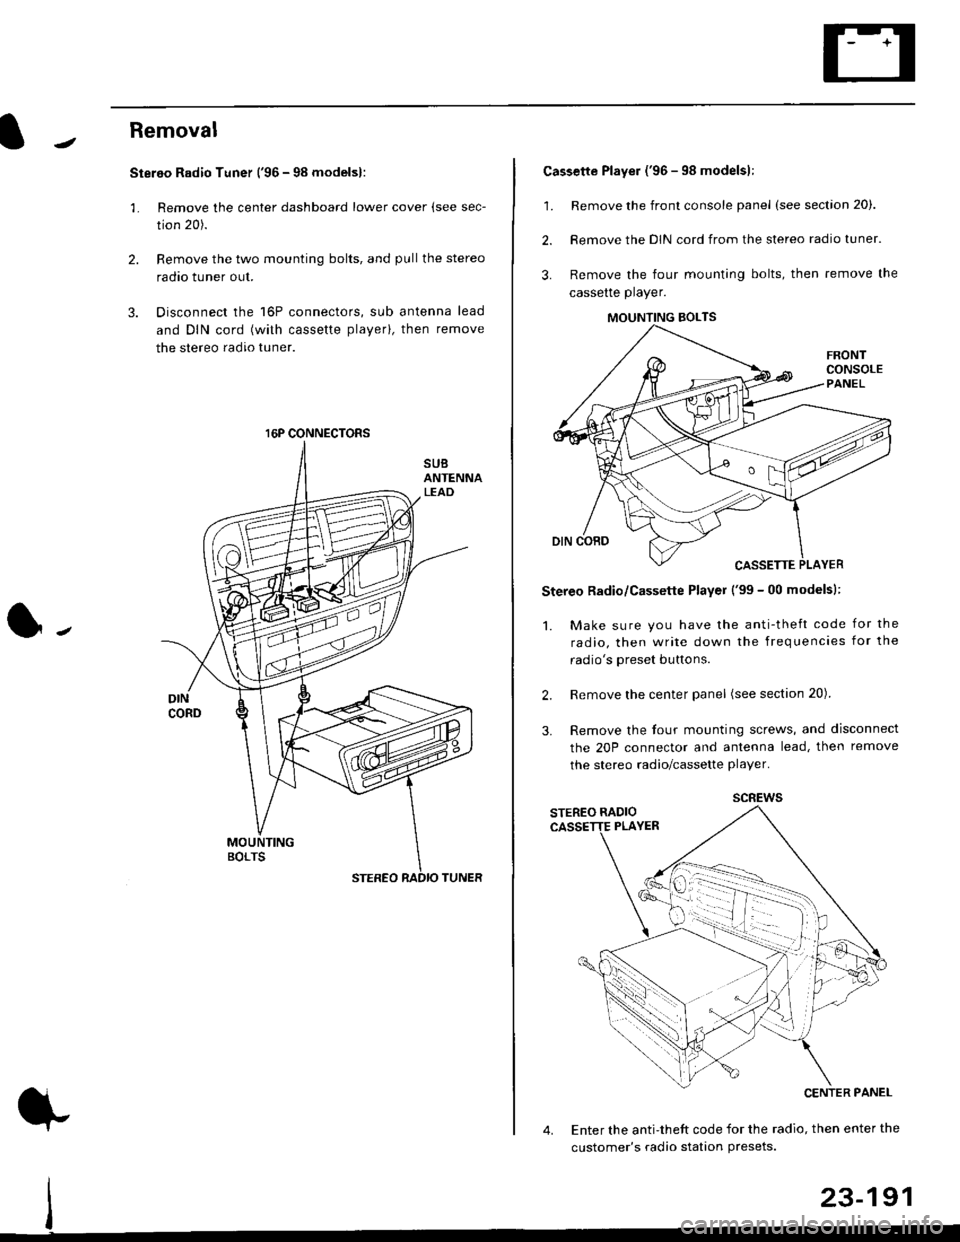 HONDA CIVIC 1998 6.G Workshop Manual Removal
Stereo Radio Tuner (96 - 98 modelsl:
3.
1.
2.
Remove the center dashboard lower cover (see sec-
tion 20).
Remove the two mounting bolts, and pullthe stereo
radao tuner out.
Disconnect the 16P